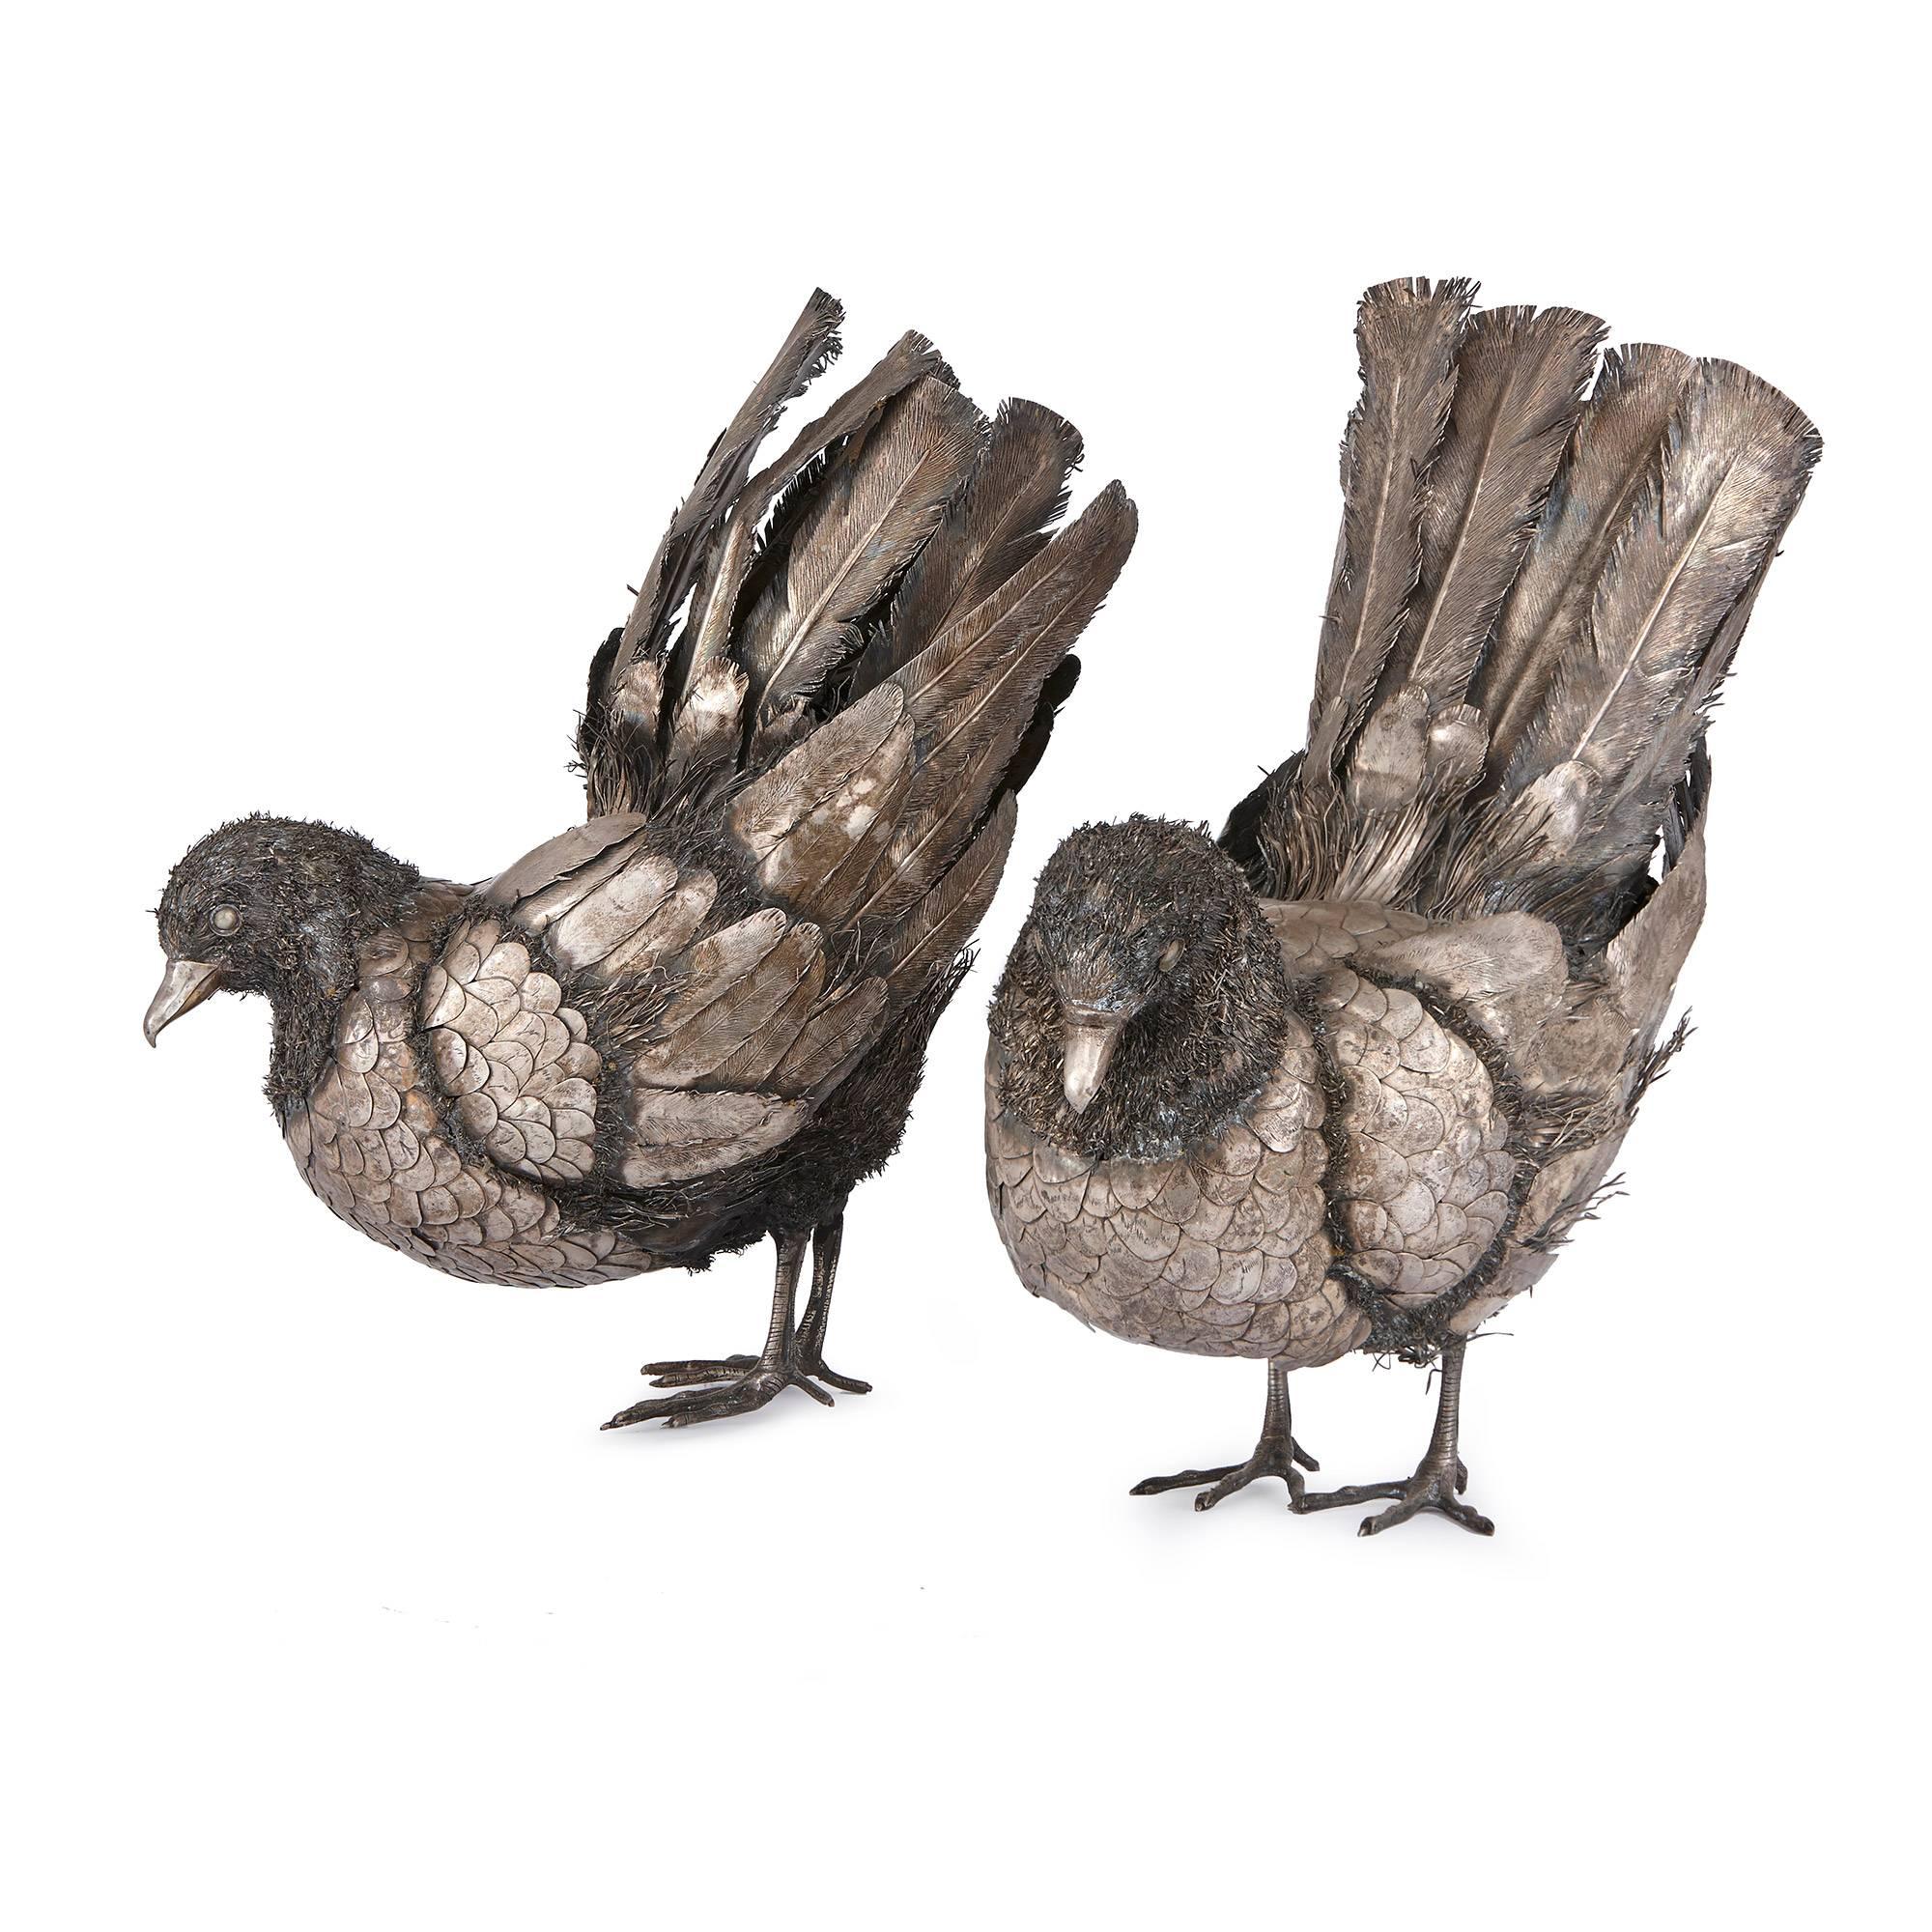 In the manner of Mario Buccellati, each standing and looking down with raised back feathers.

These charming silver birds, modelled in a beautifully naturalistic style, would make a wonderful decorative addition to any elegant interior.